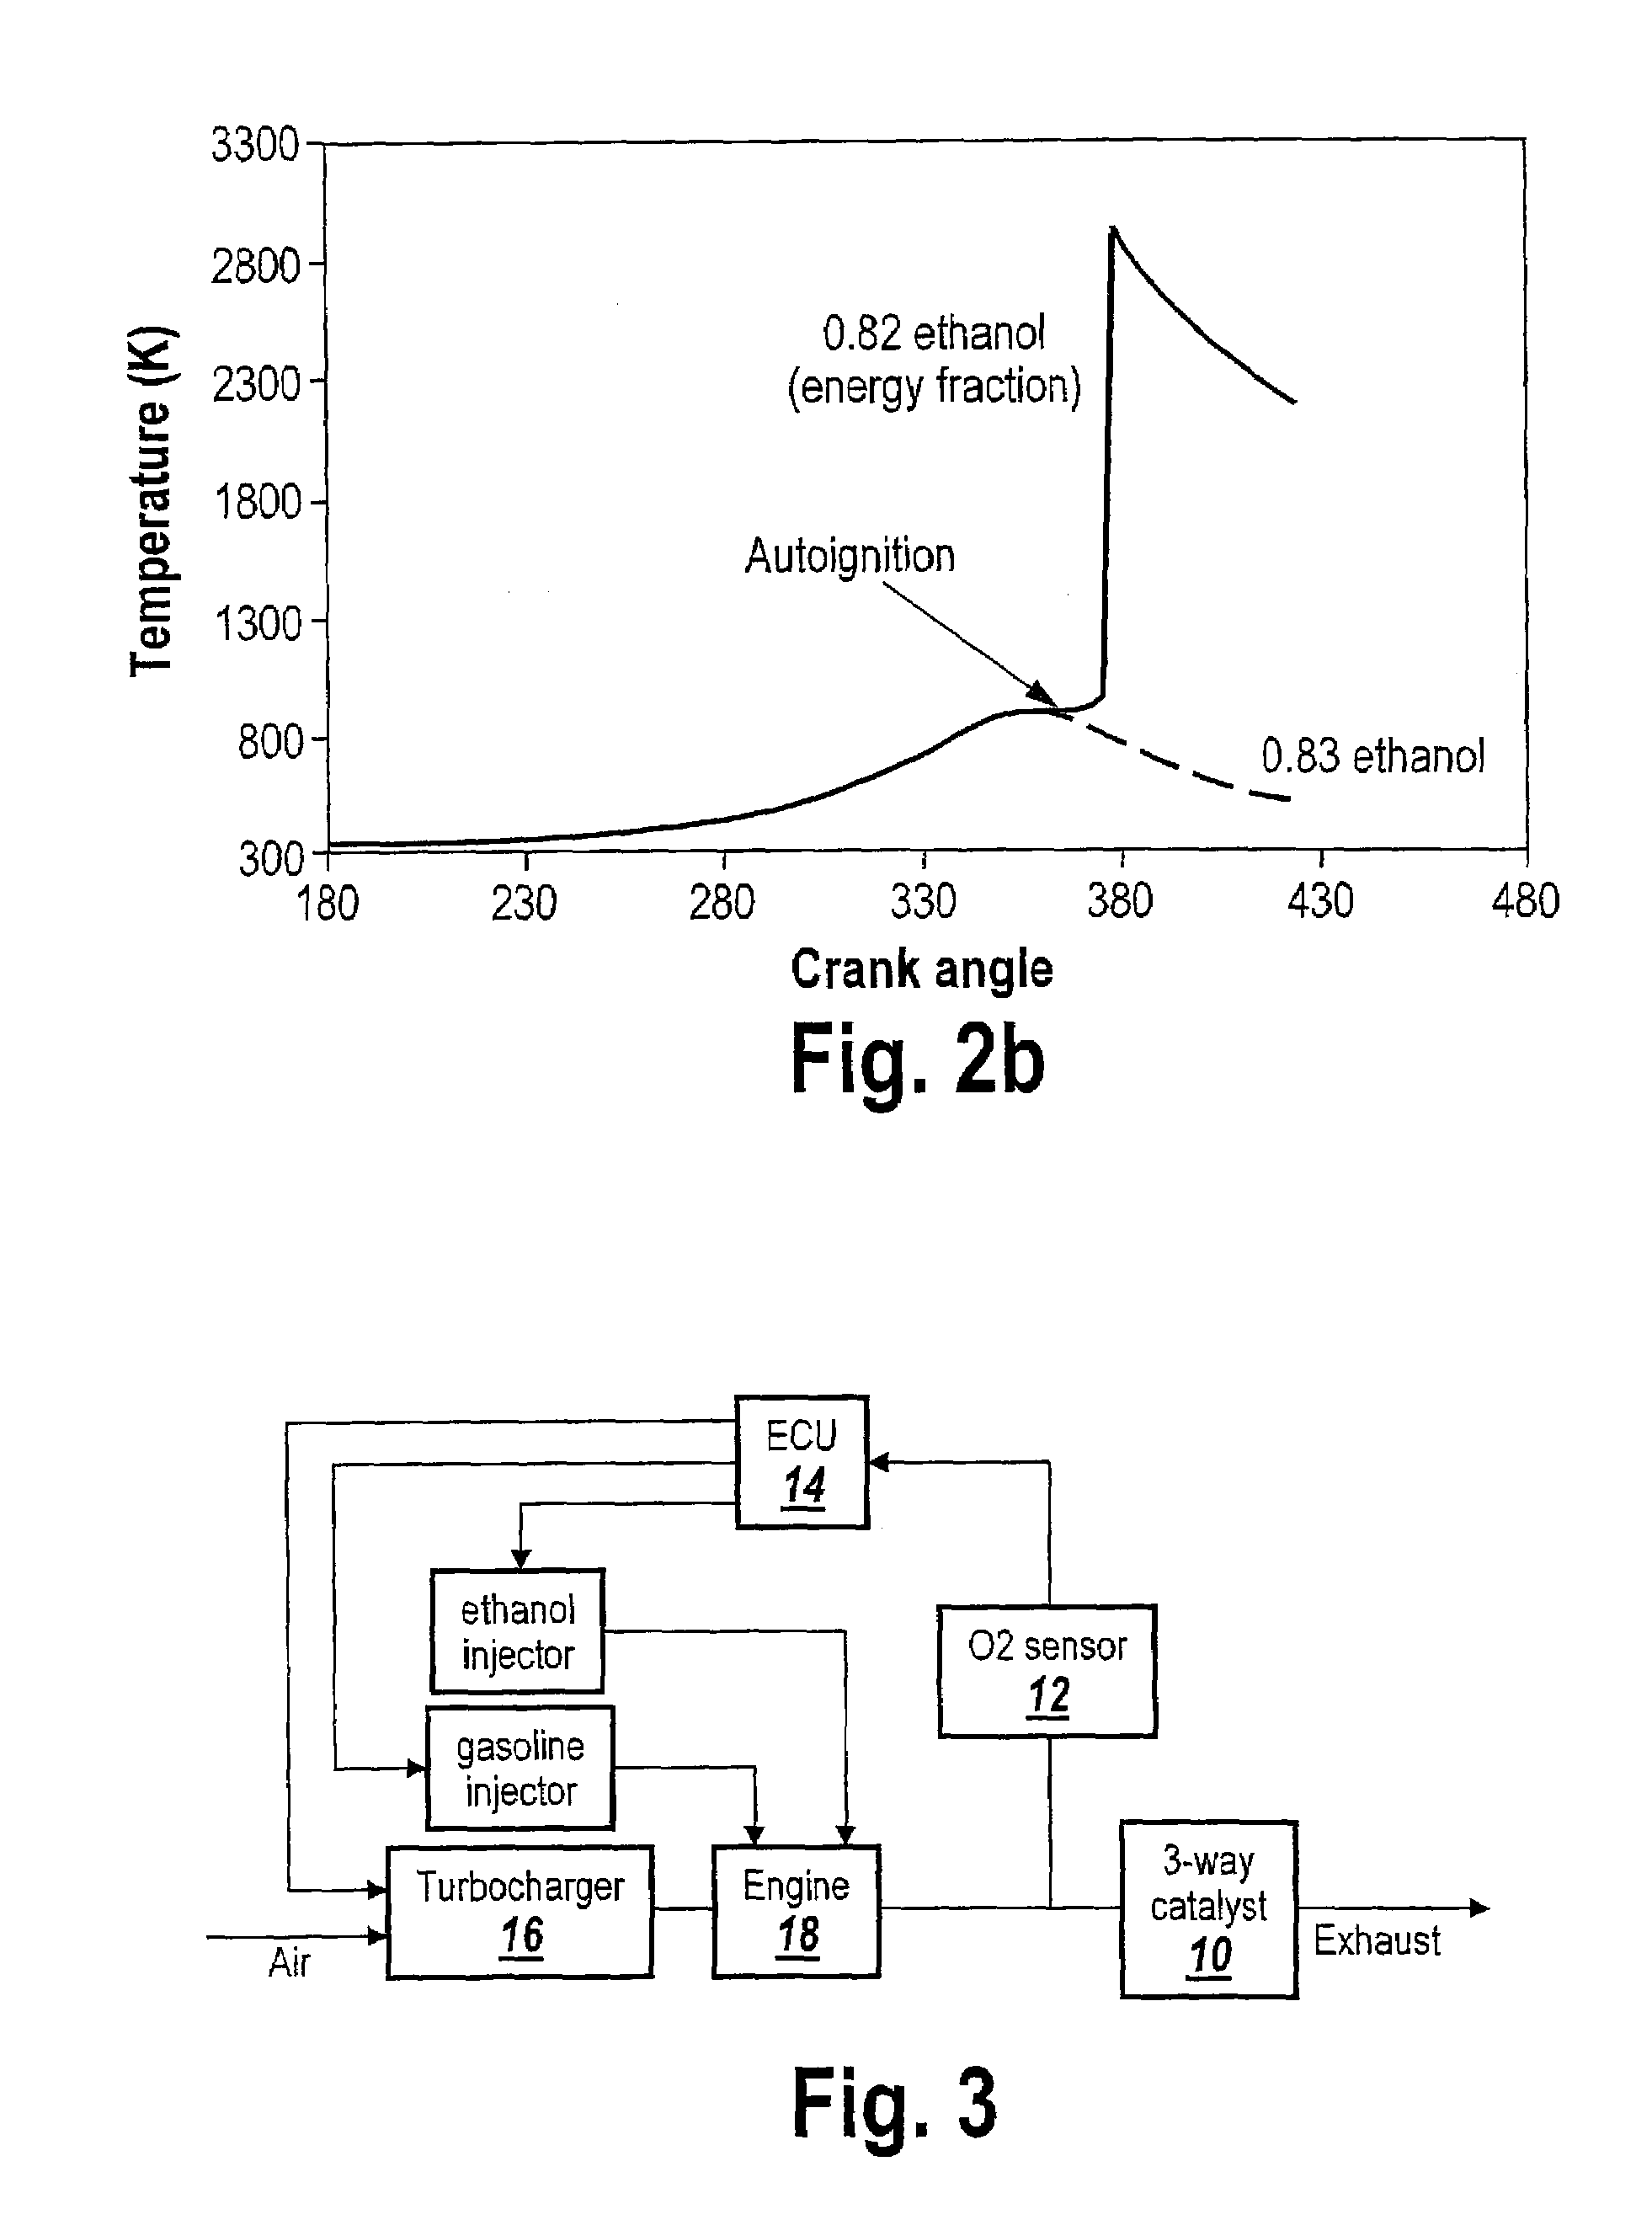 Optimized Fuel Management System for Direct Injection Ethanol Enhancement of Gasoline Engines